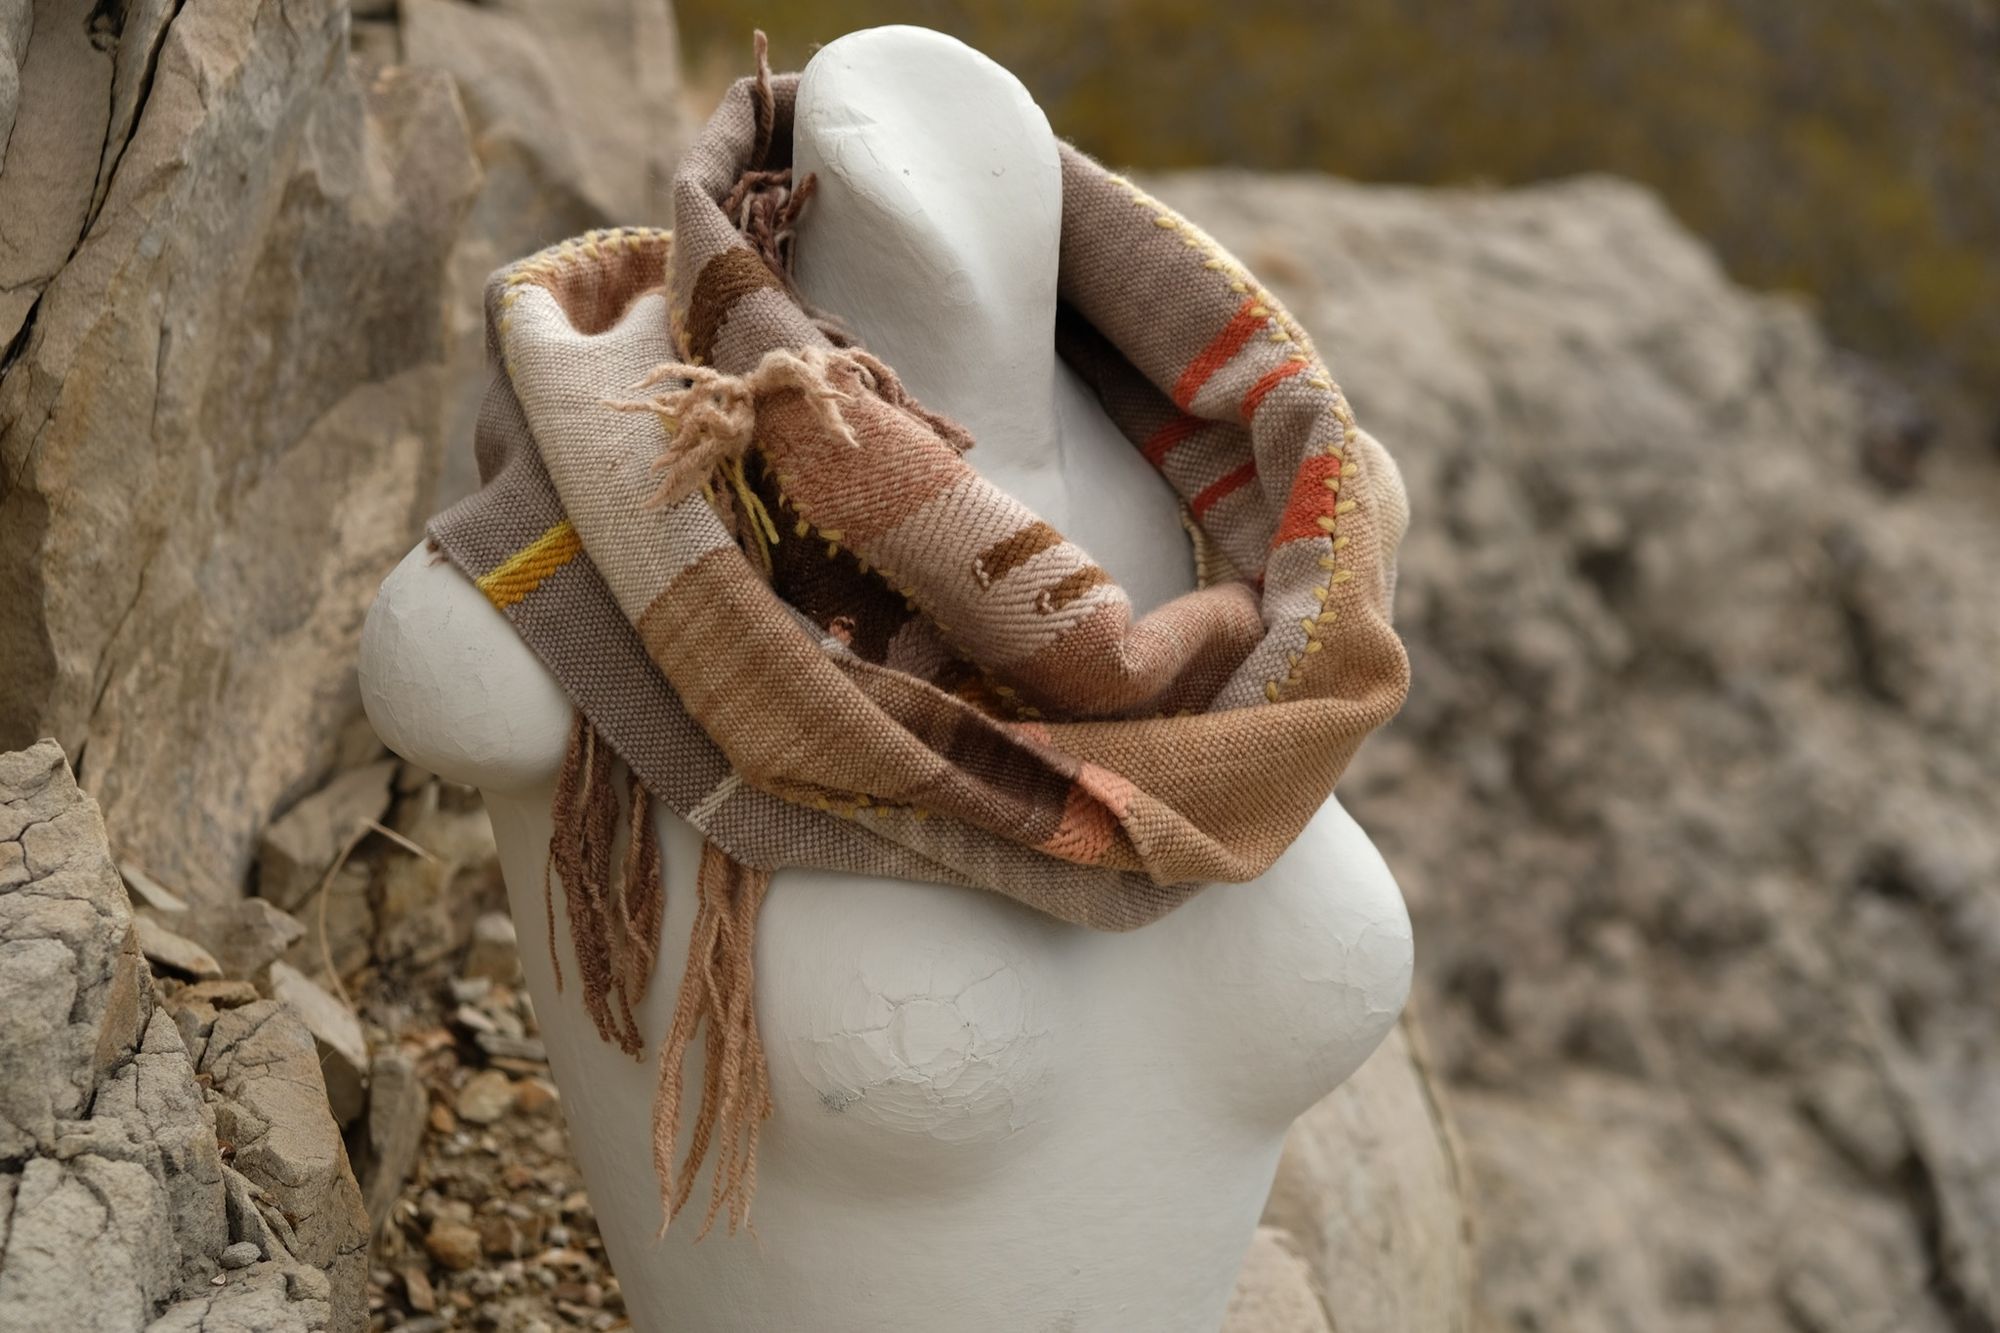 naturally dyed brown, yellow, pink, red and tan fringed infinity scarf on a white mannequin bust in the desert